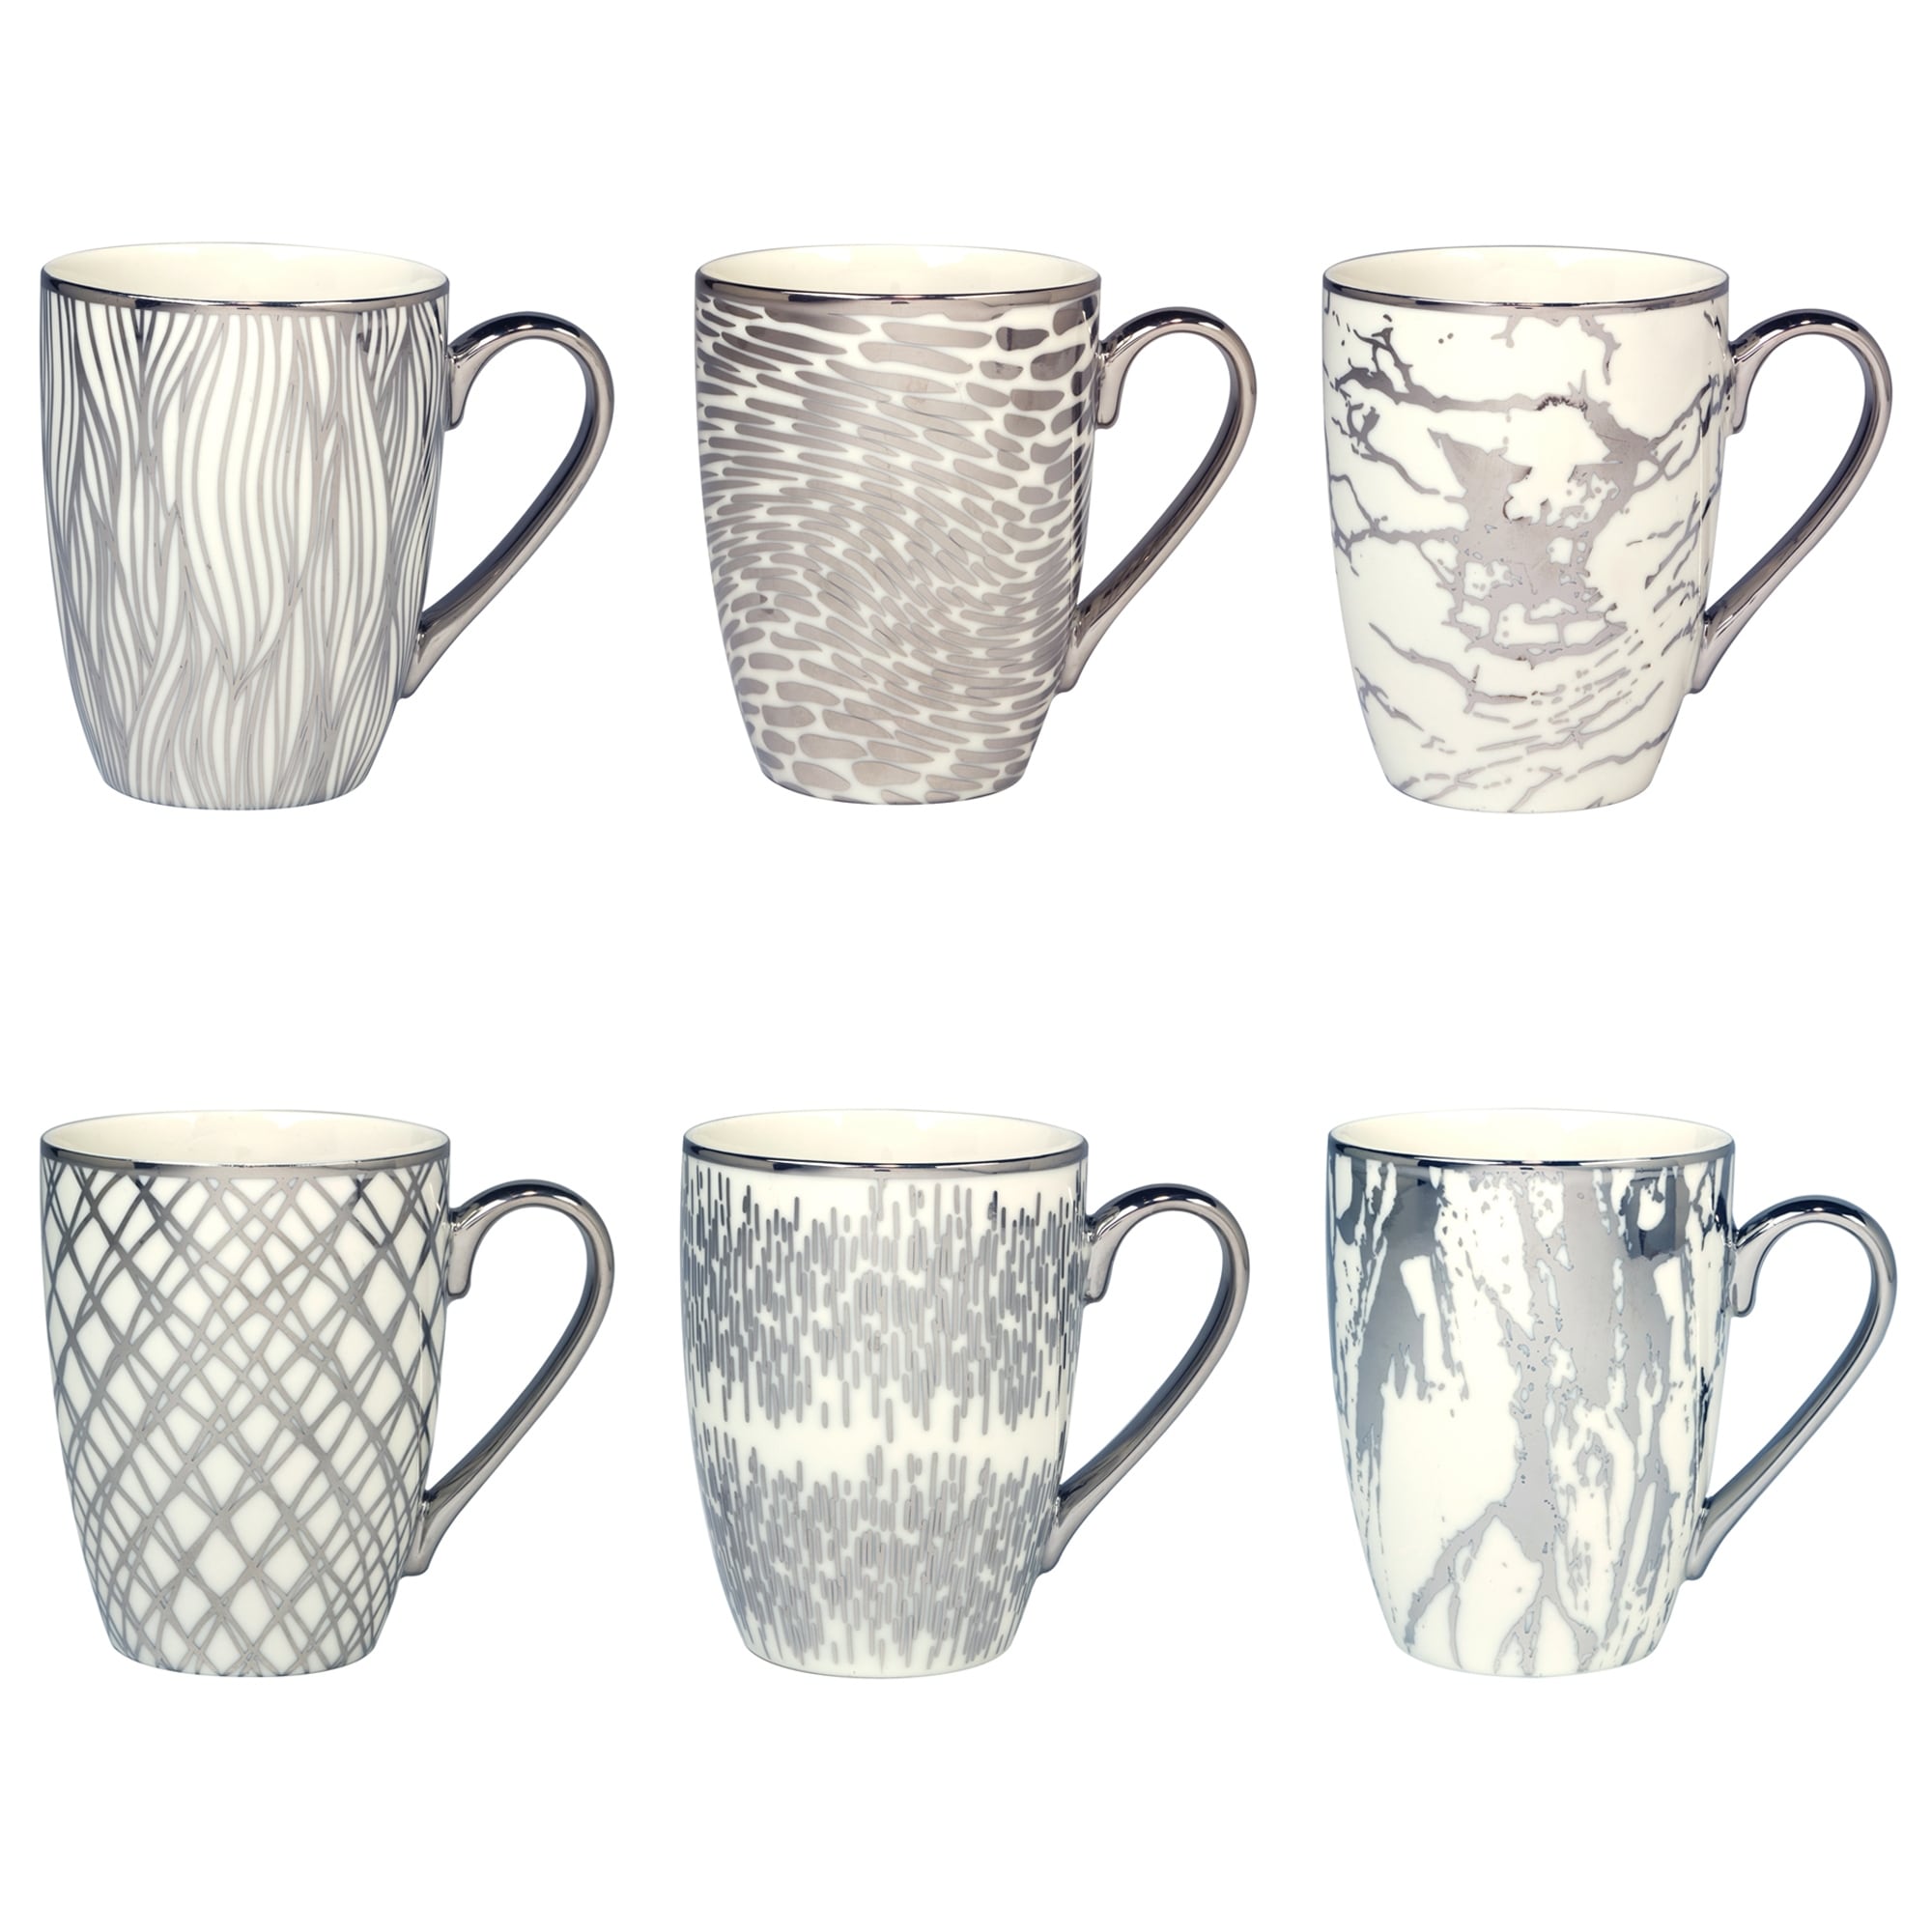 Certified International Matrix Silver Plated Tapered 16 oz. Mugs, Set of 6 Assorted Designs